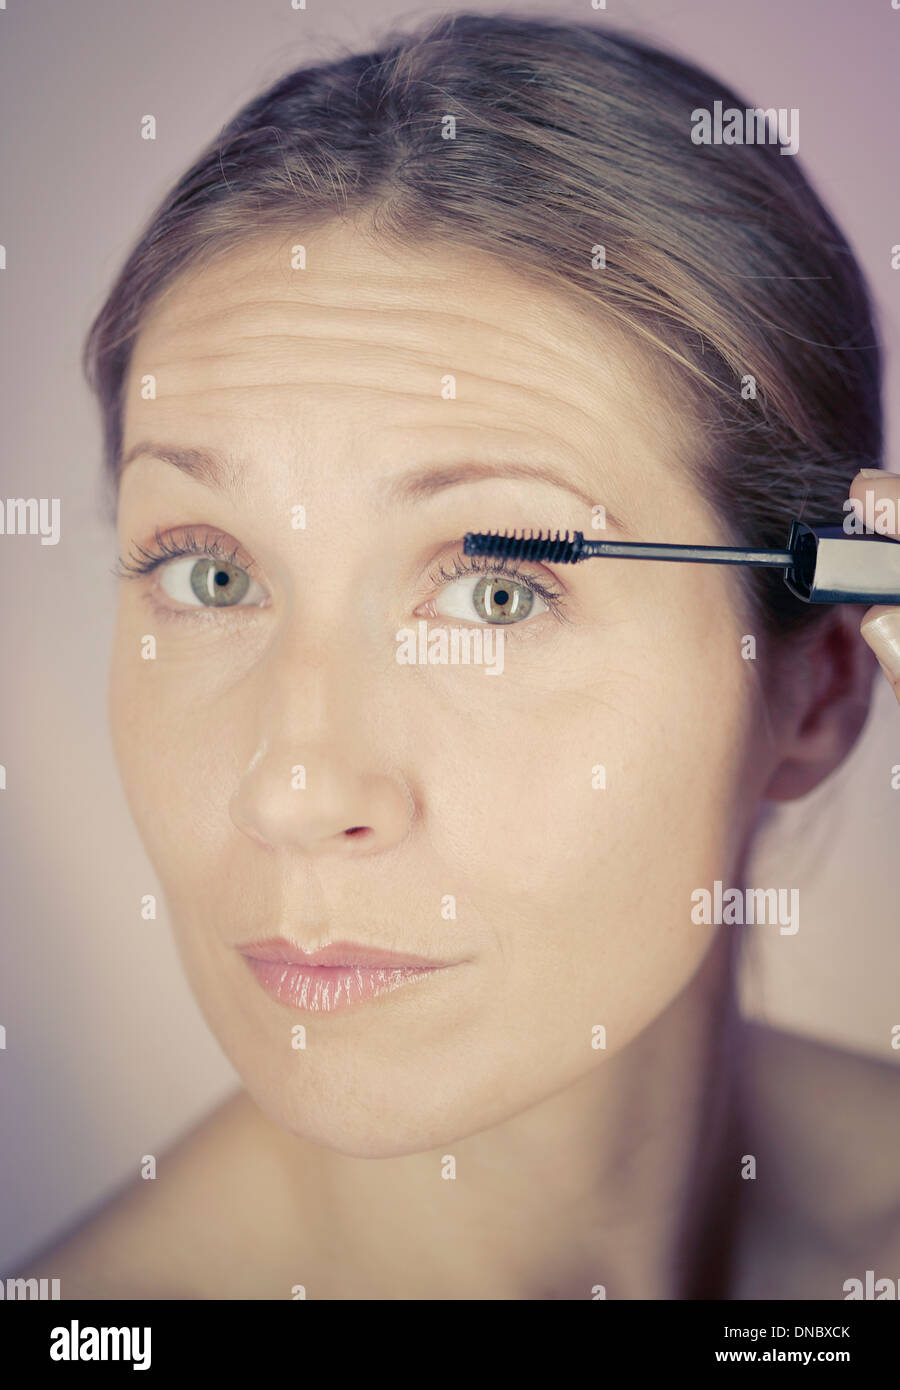 A middle aged woman applying mascara Stock Photo